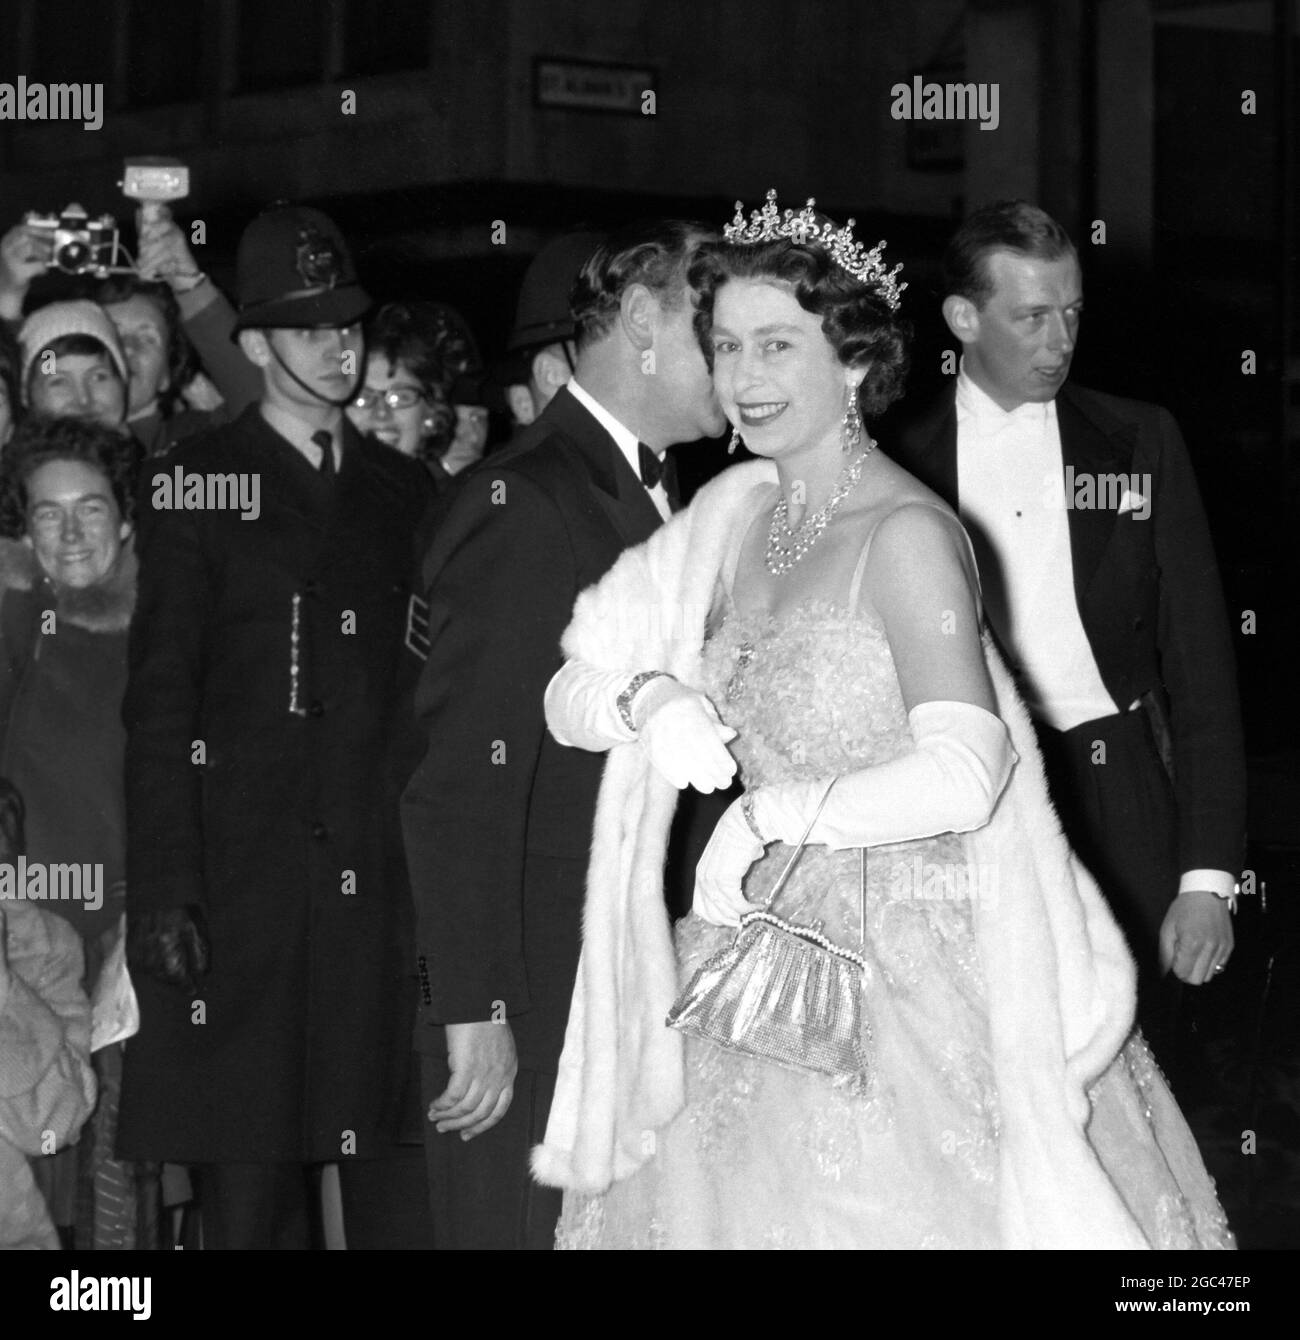 Royalty queen elizabeth ii 1962 Black and White Stock Photos & Images ...